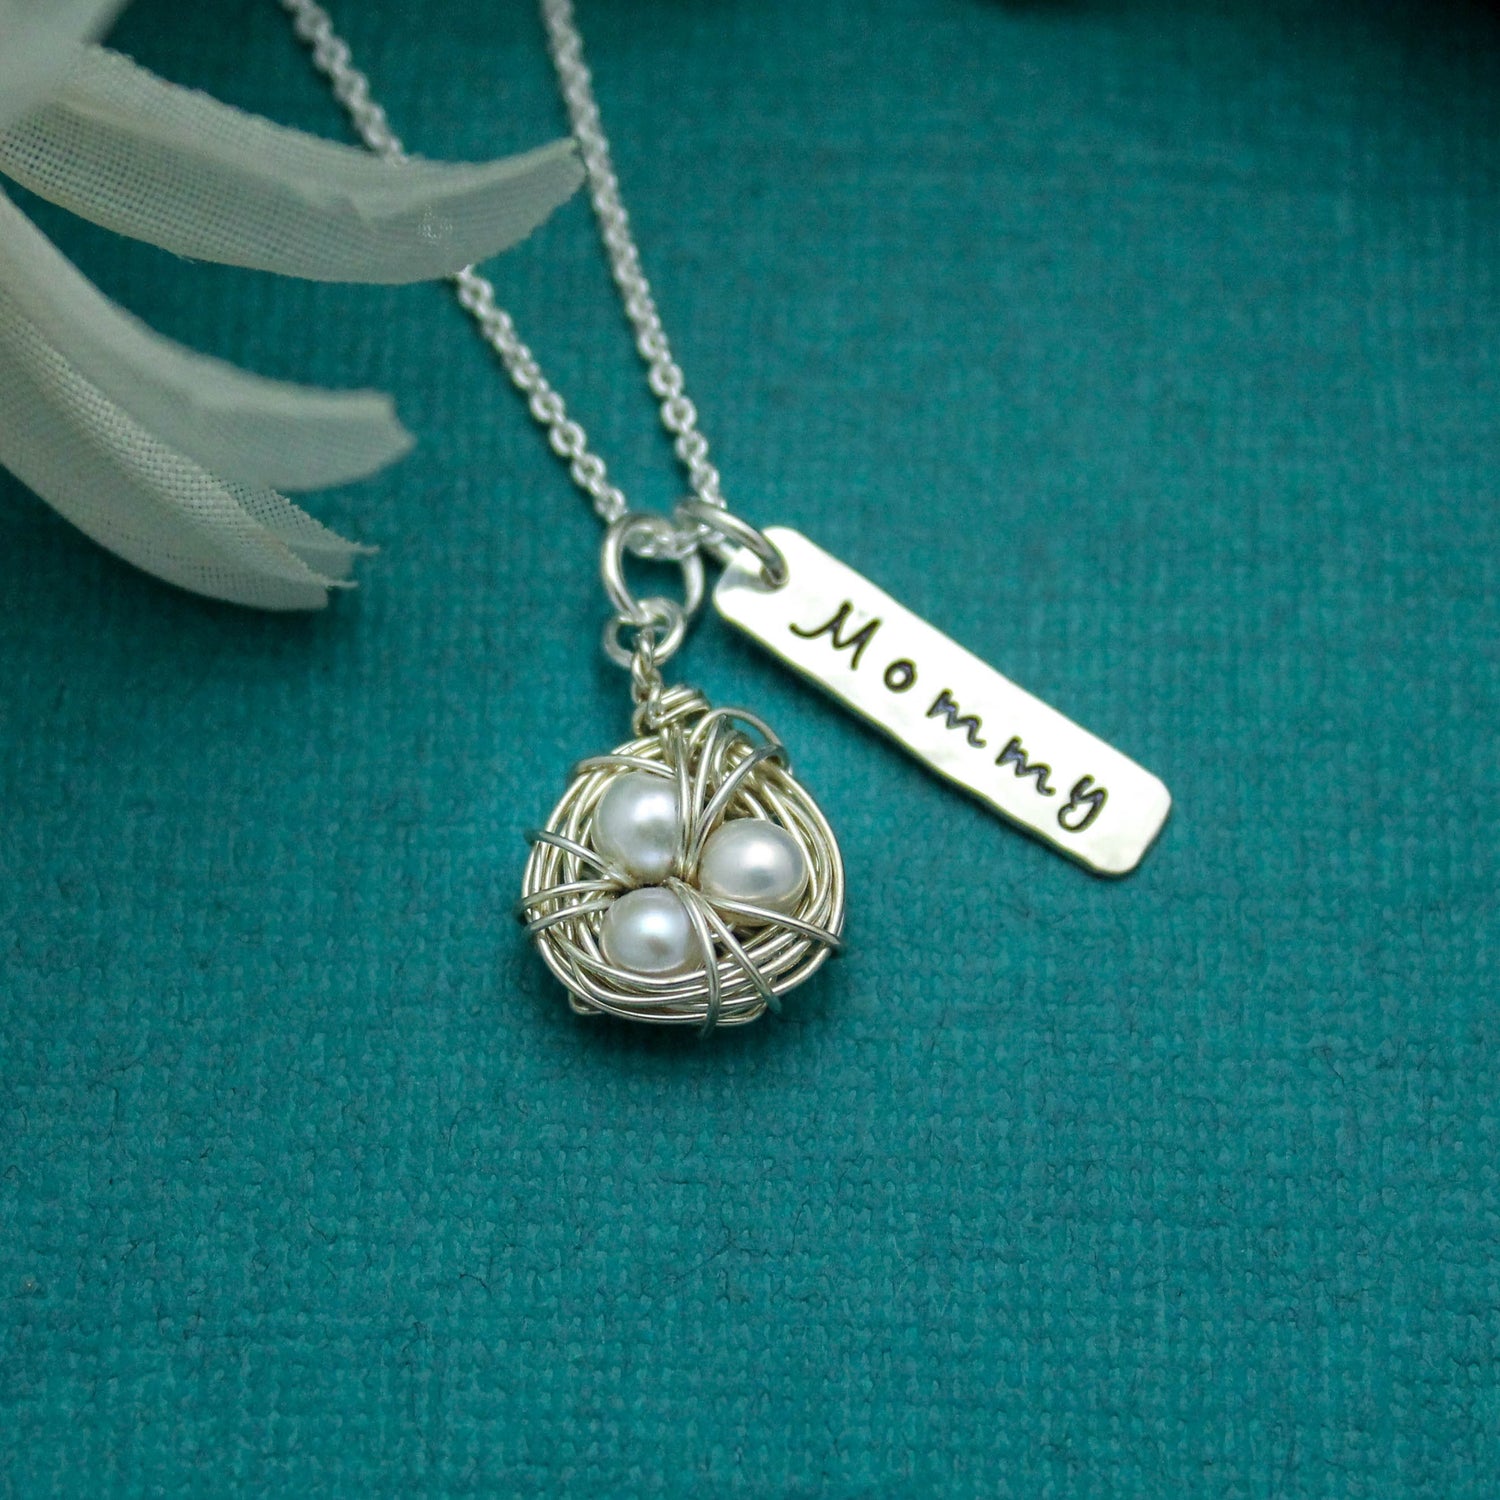 Bird's Nest Mother Necklace in Sterling Silver, Mother Necklace, Bird Nest Pearl Charm, Mother's Day Jewelry, Hand Stamped Personalized Mom